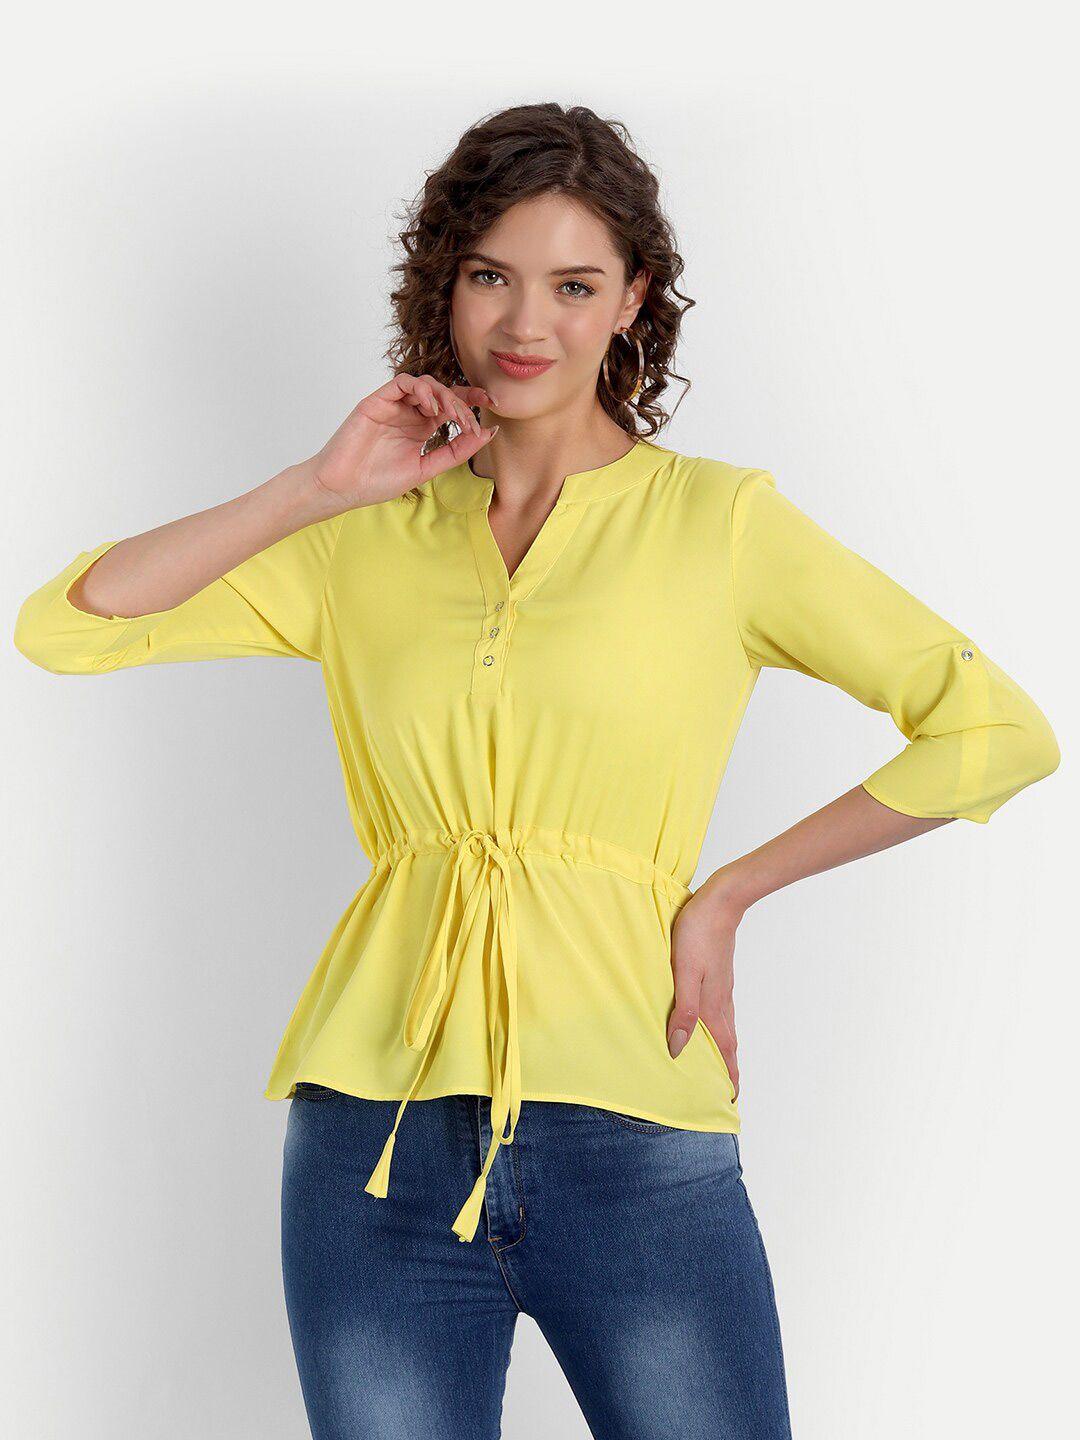 parassio clothings women yellow mandarin collar georgette cinched waist top